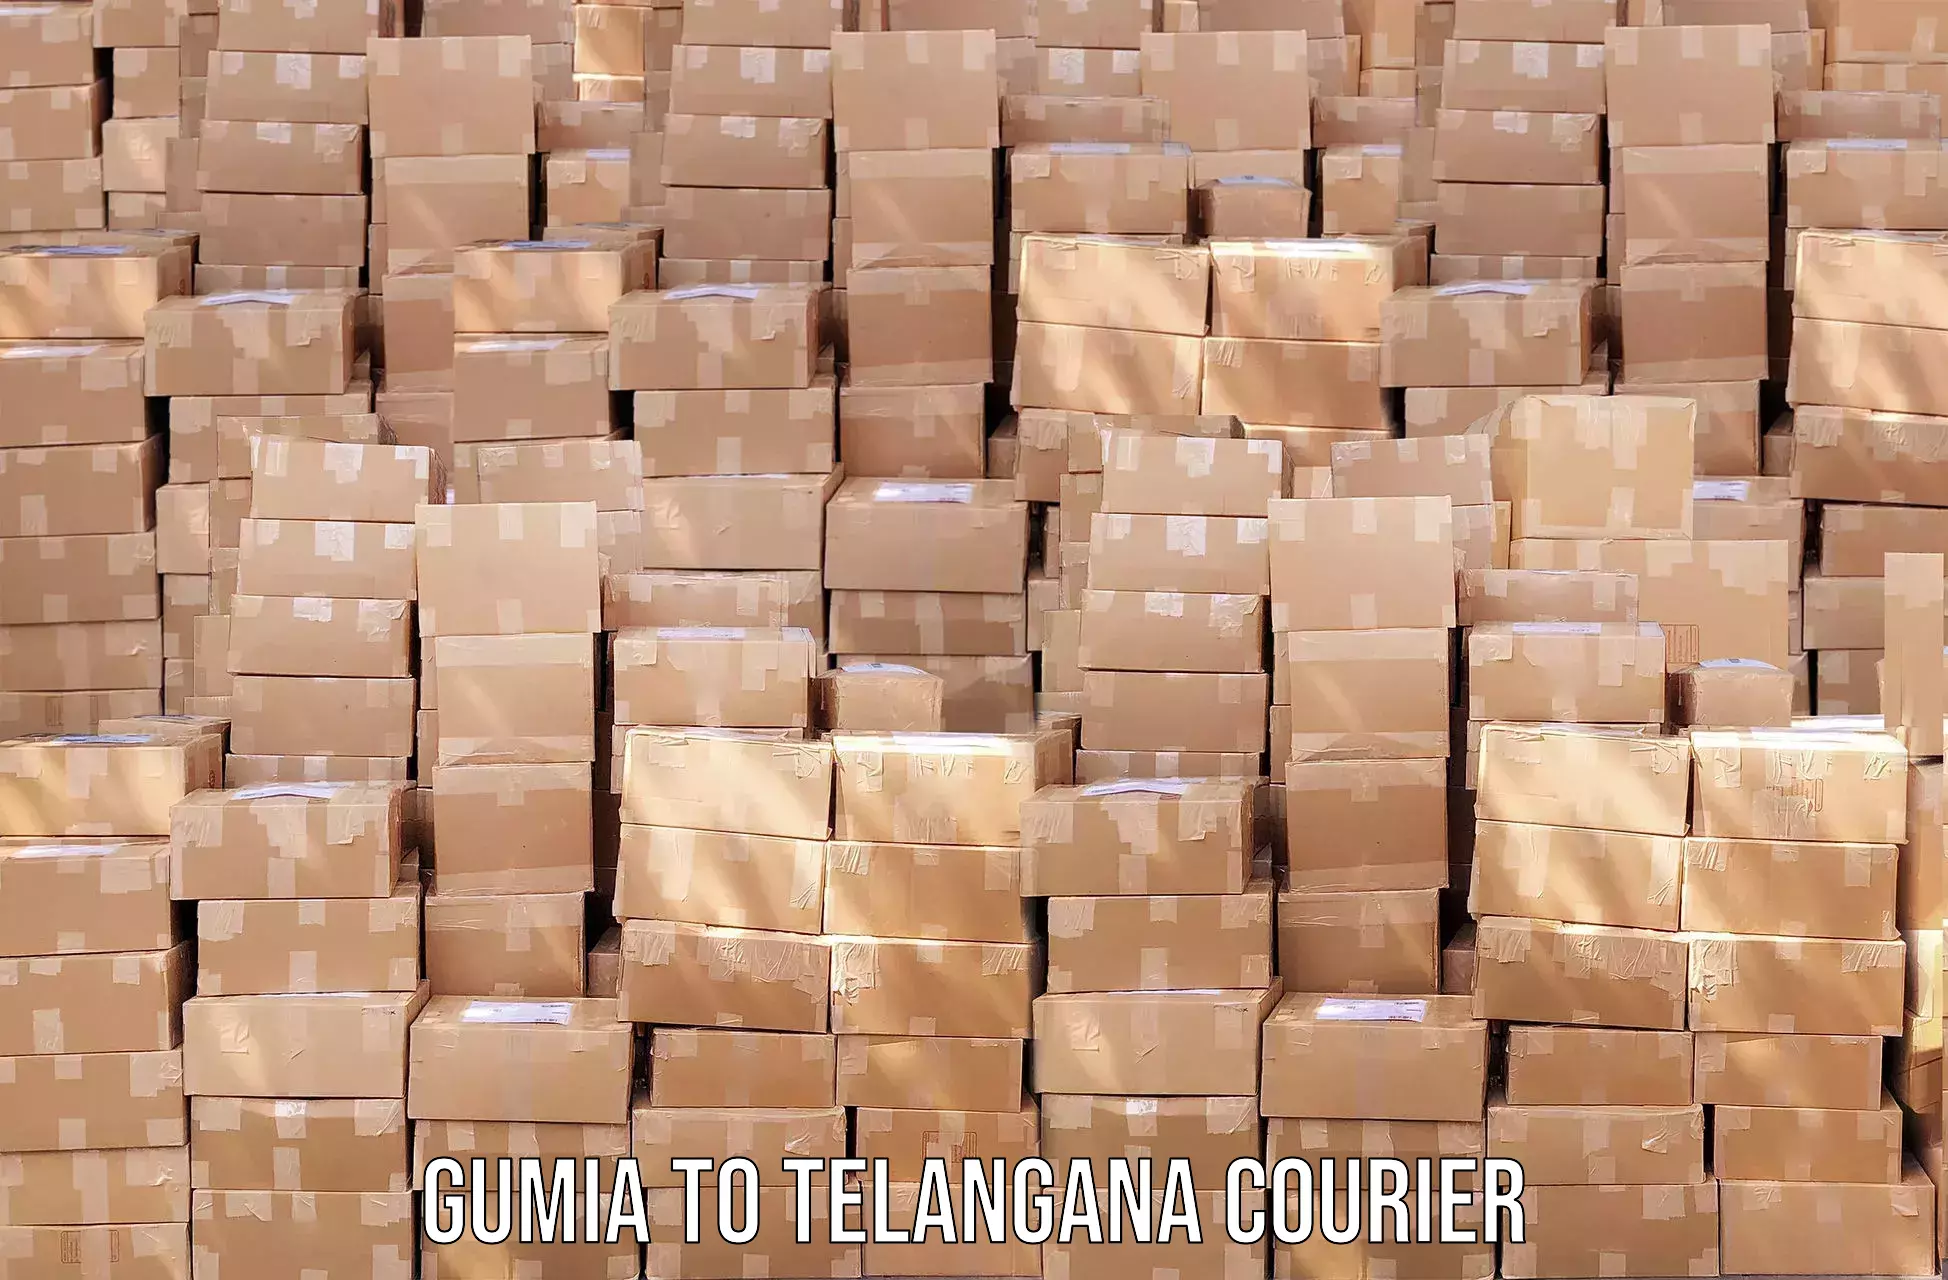 Residential courier service Gumia to Telangana